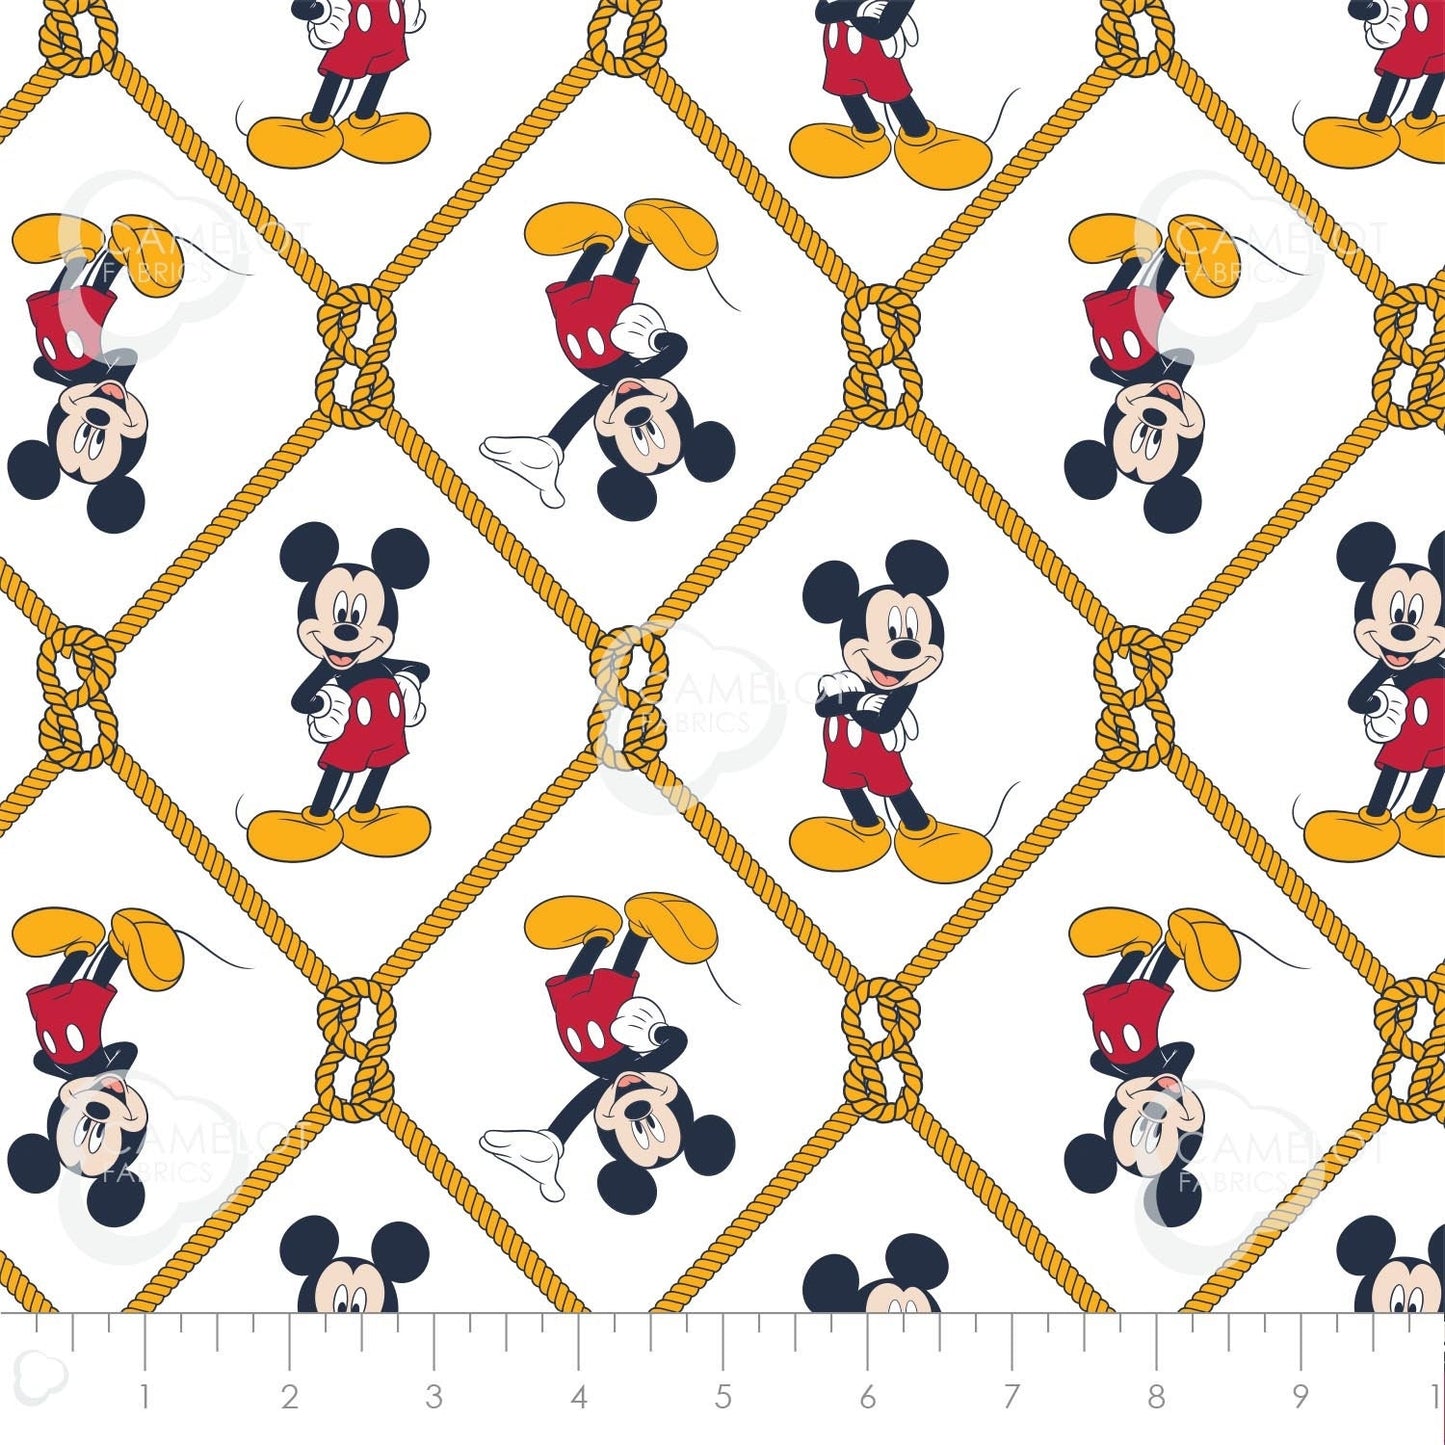 Licensed Disney's Mickey Mouse Oh Boy! Net in White 85270505-01 Cotton Woven Fabric